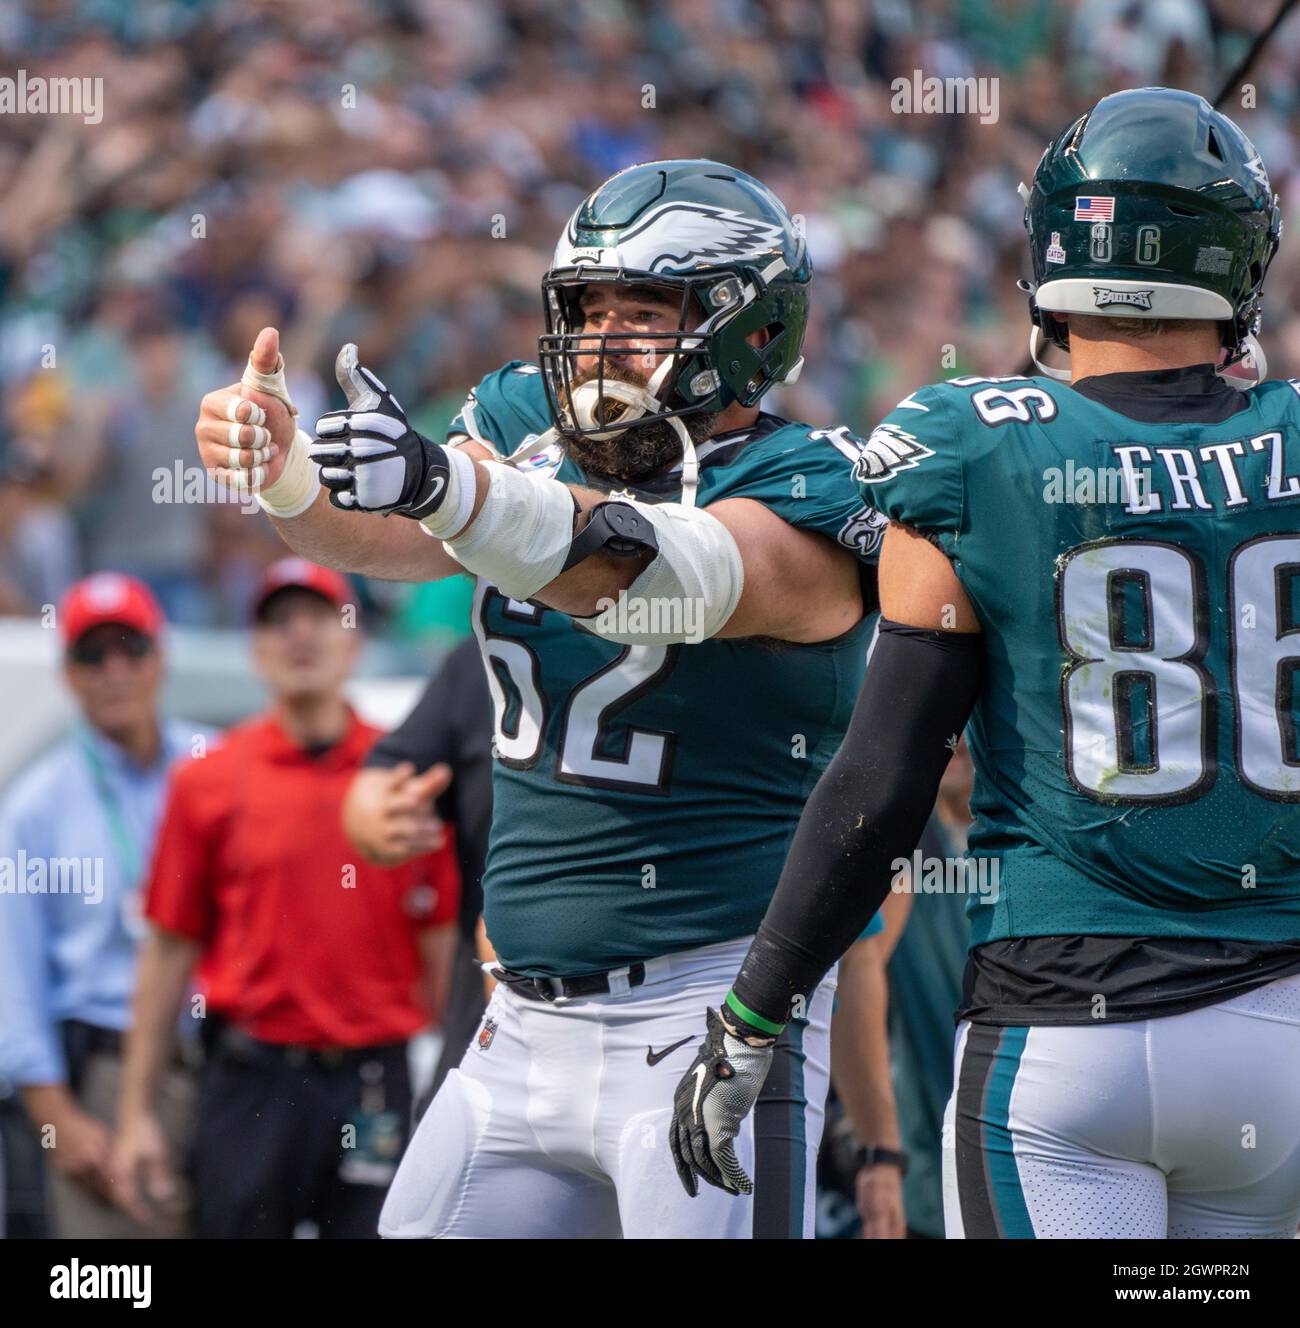 Philadelphia, Pennsylvania, USA. 3rd Oct, 2021. Eagles center JASON KELCE,  #62, has a sarcastic thumbs up for the officials after a call late in an  NFL football game between the Philadelphia Eagles